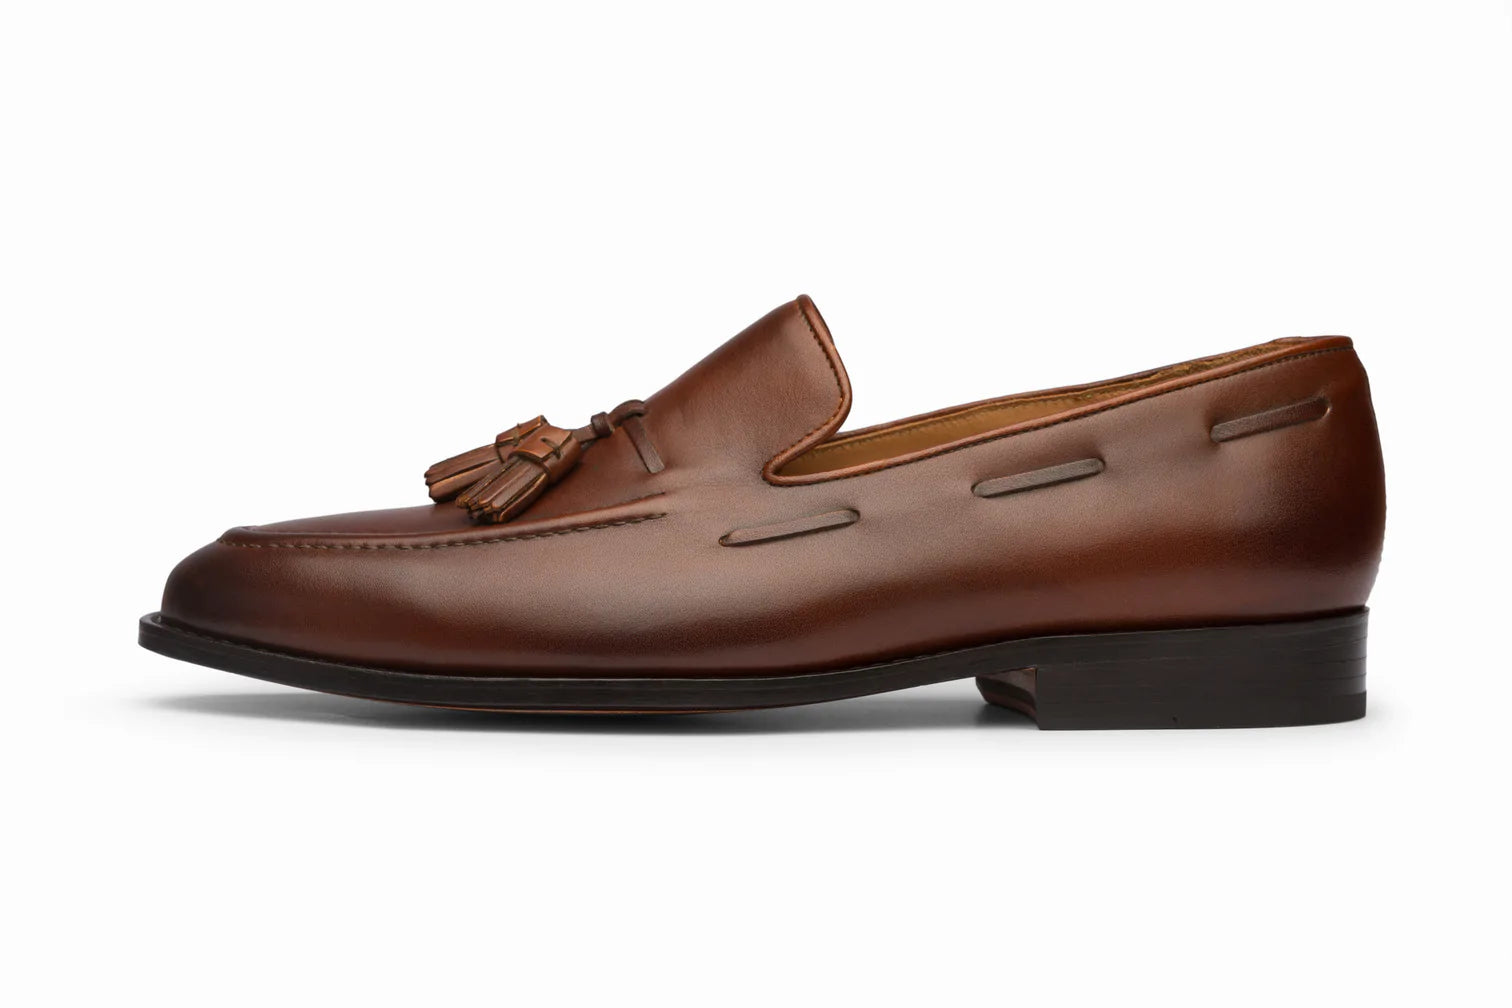 Tassel loafers shoes brown, formal shoes for men in Dubai.